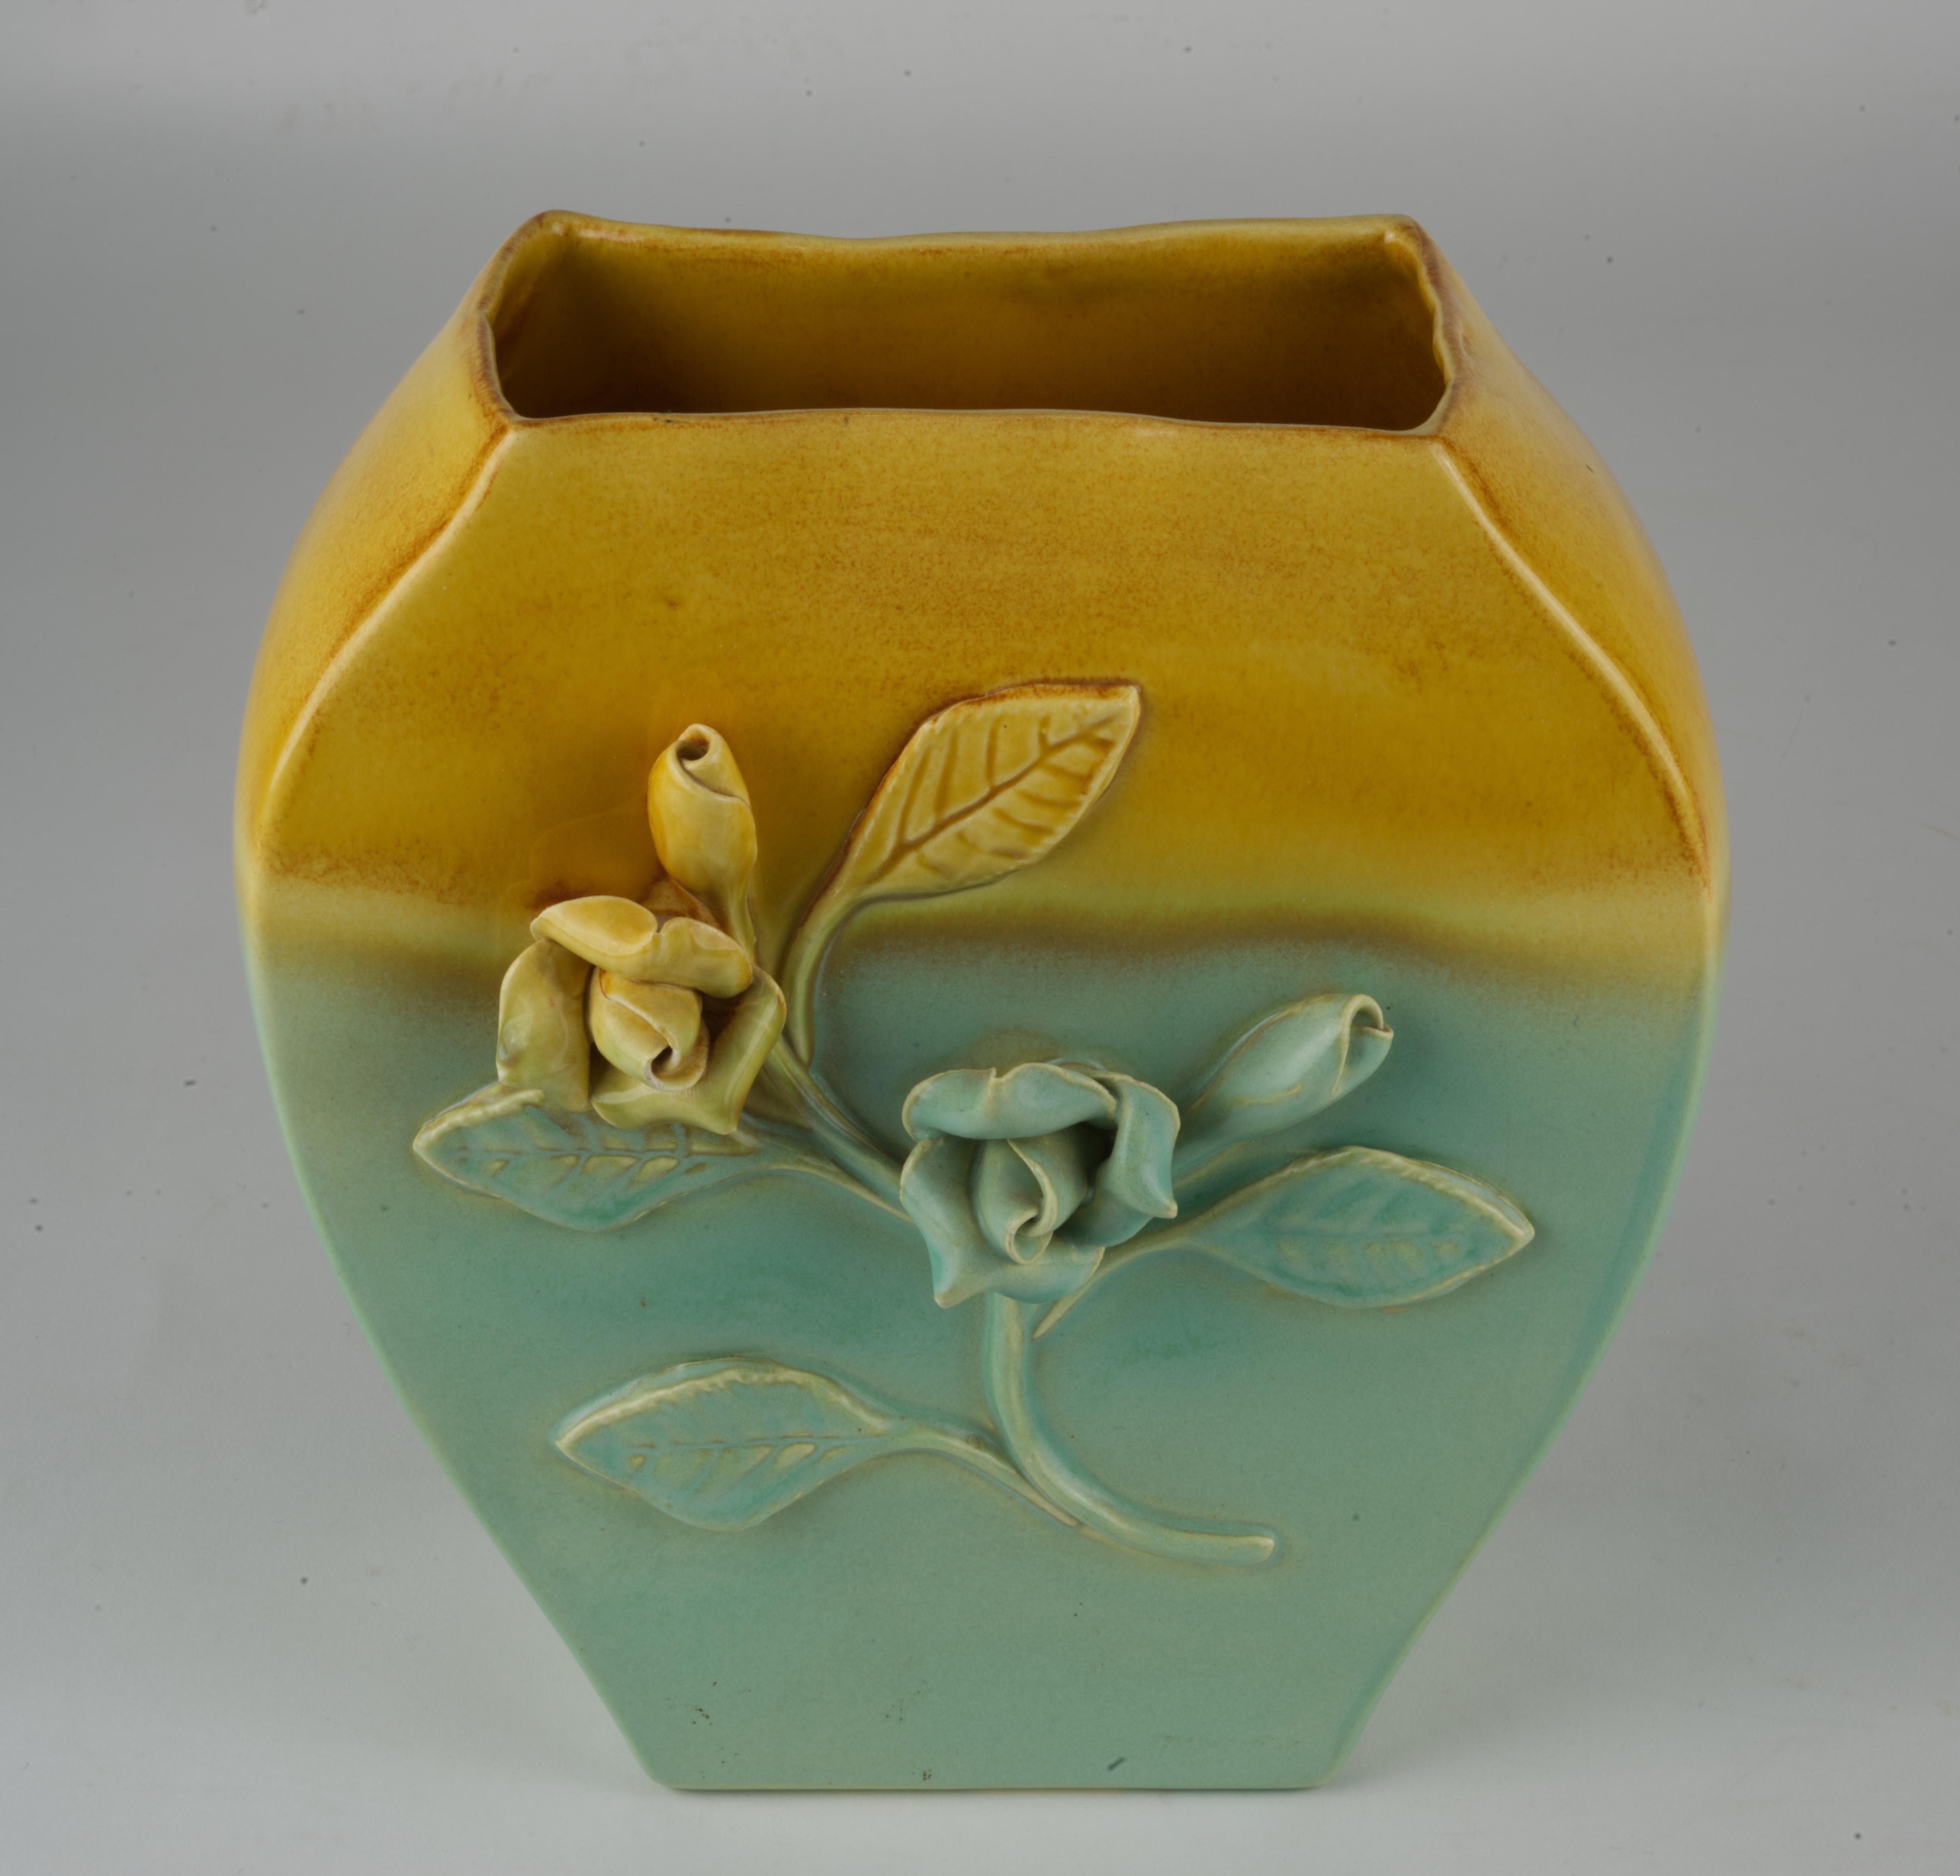  Vintage California pottery vase is decorated with applied flower detail; it is glazed in combination of glossy yellow glaze on top and semi-matte light blue glaze on the rest of the vase. It is signed on the bottom with handwritten model number and